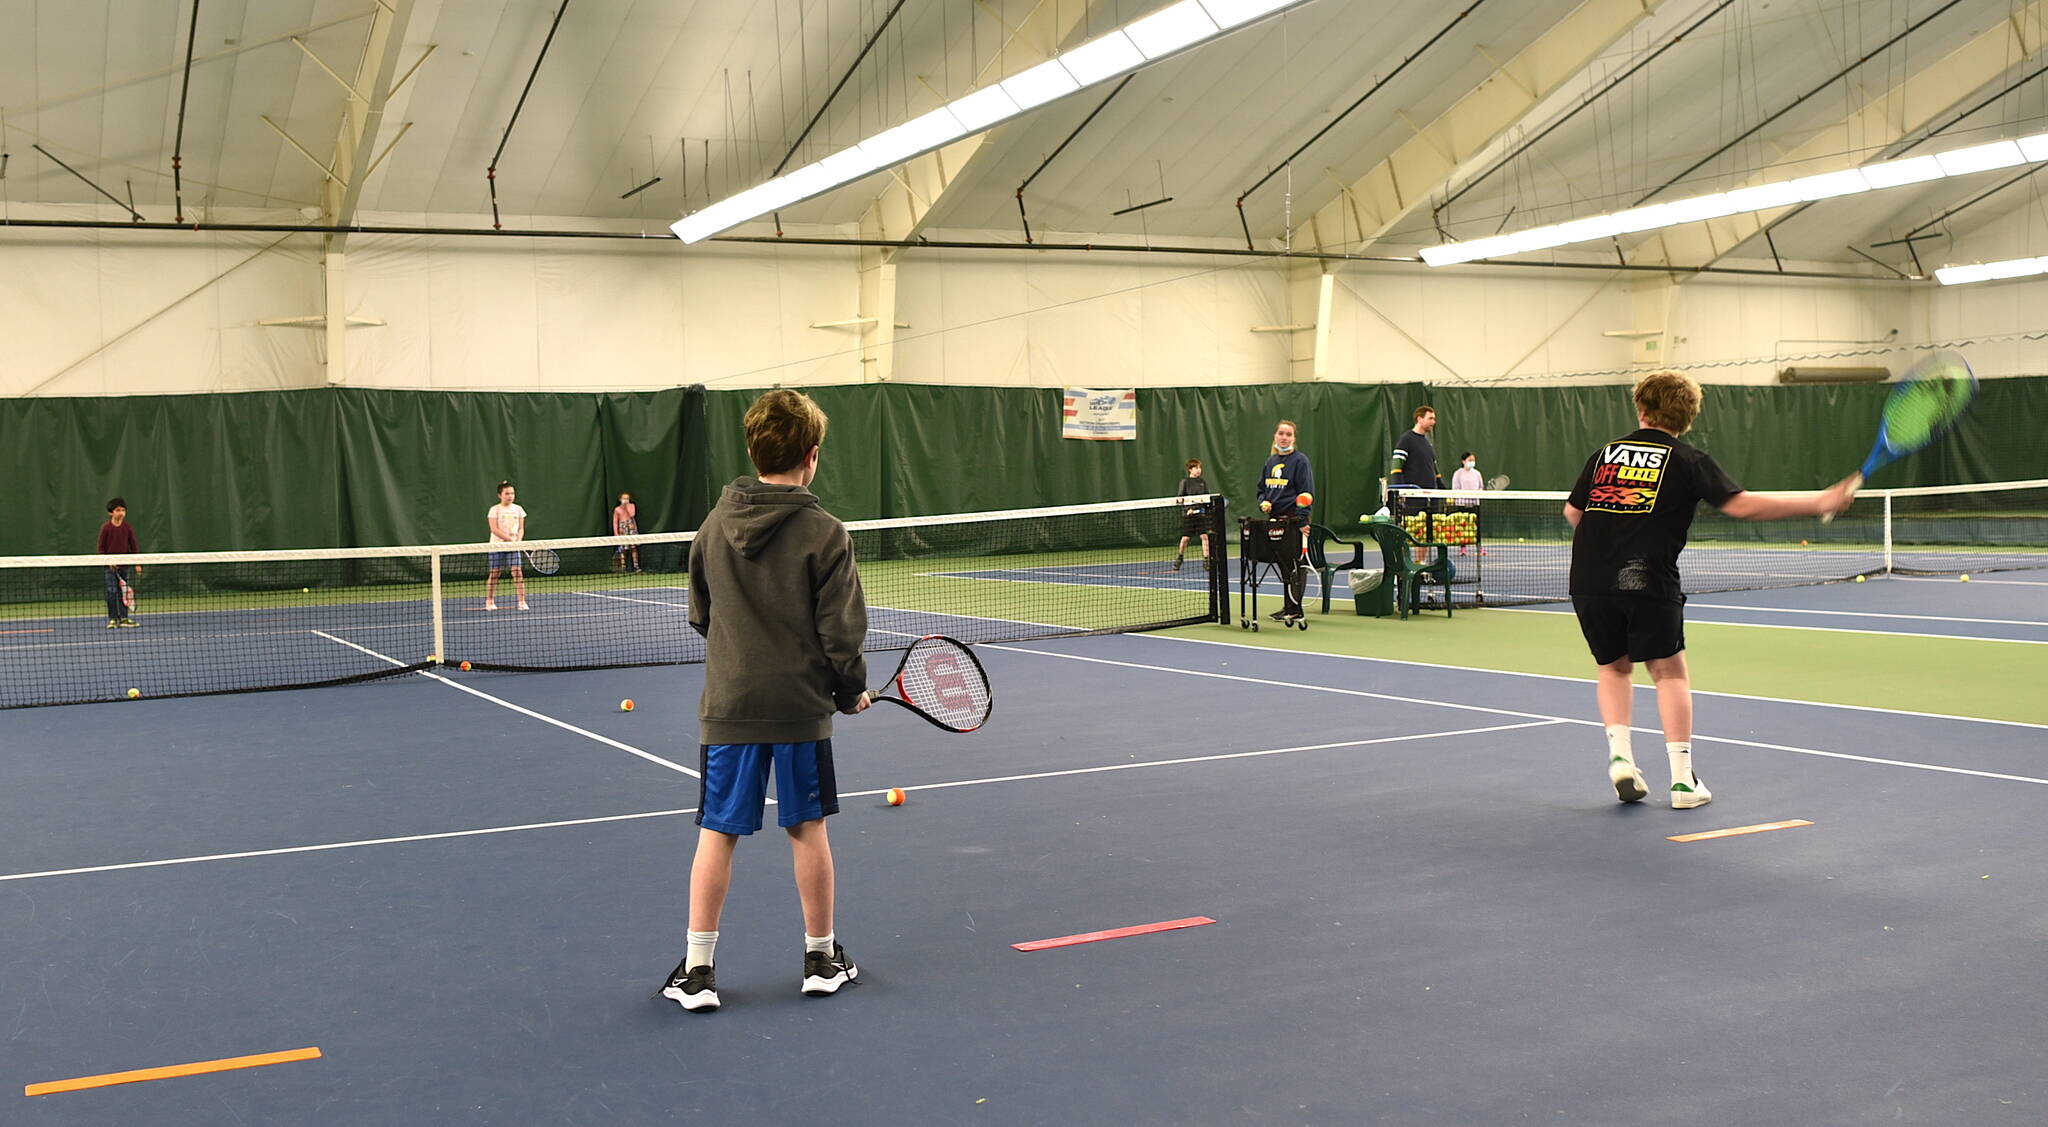 Tennis lessons at the BI Recreation Center in Meadowmeer.